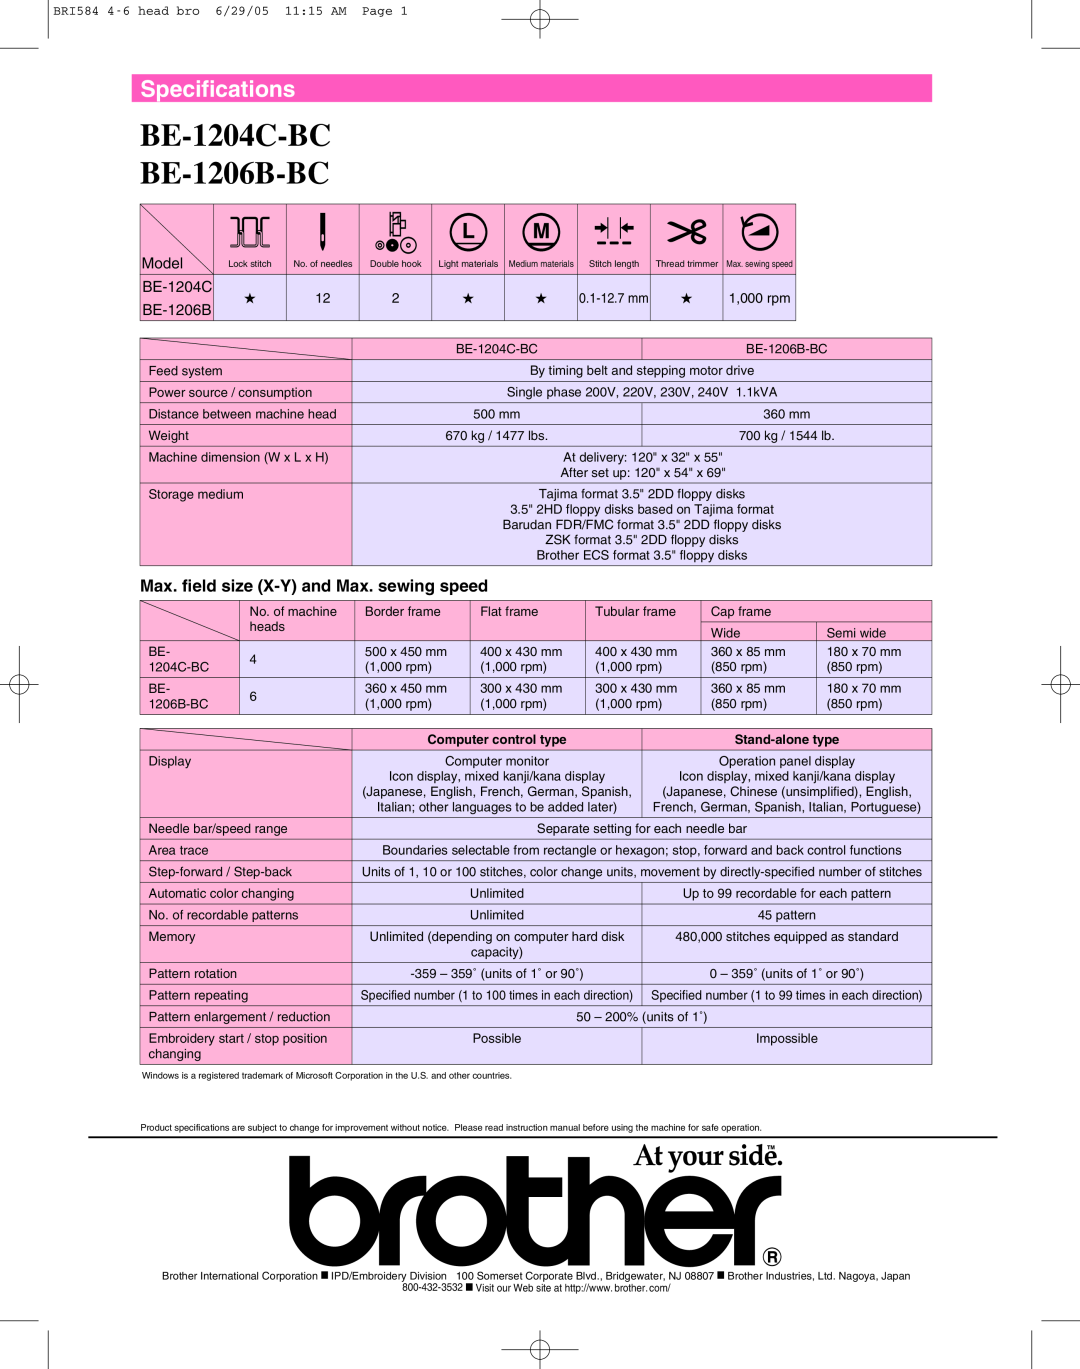 Brother specifications Specifications, BE-1204C-BC BE-1206B-BC, Max. field size X-Y and Max. sewing speed, Model 